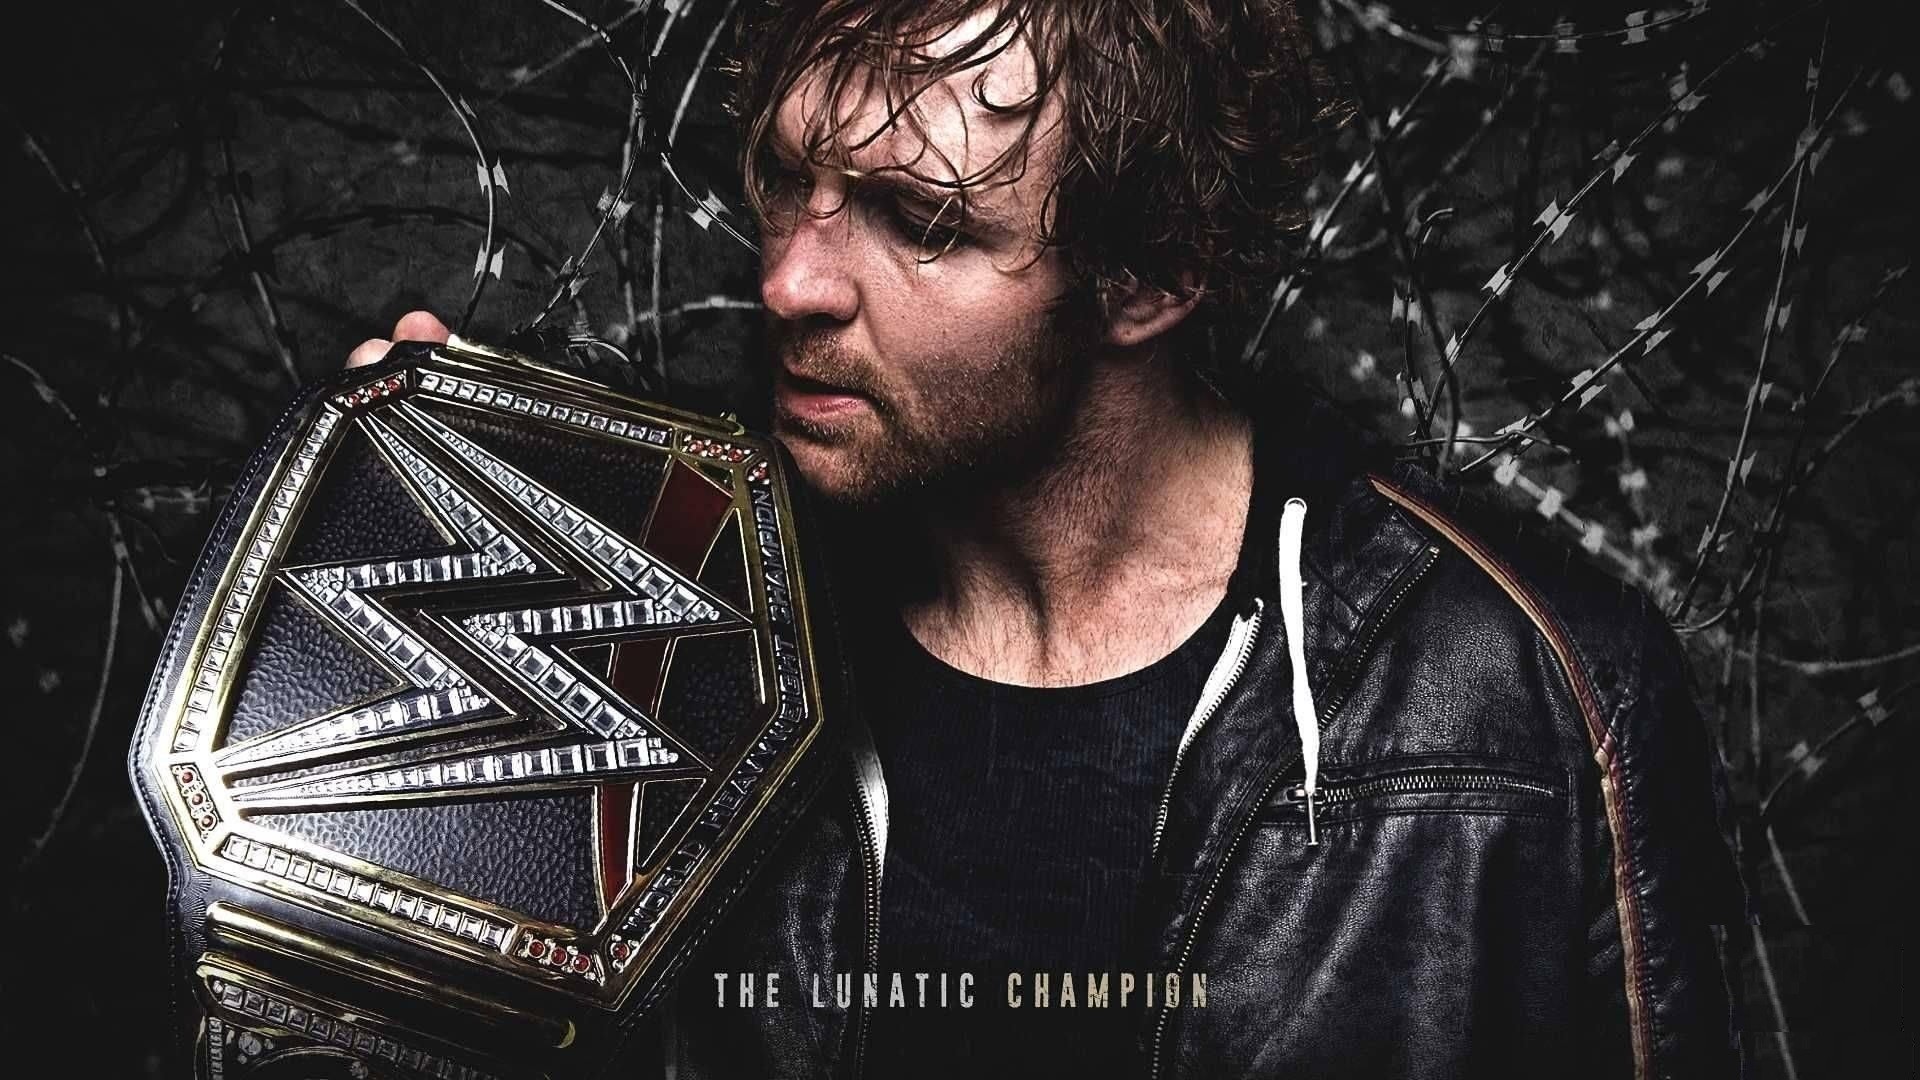 wwe all superstars wallpaper,cool,album cover,darkness,leather,music artist